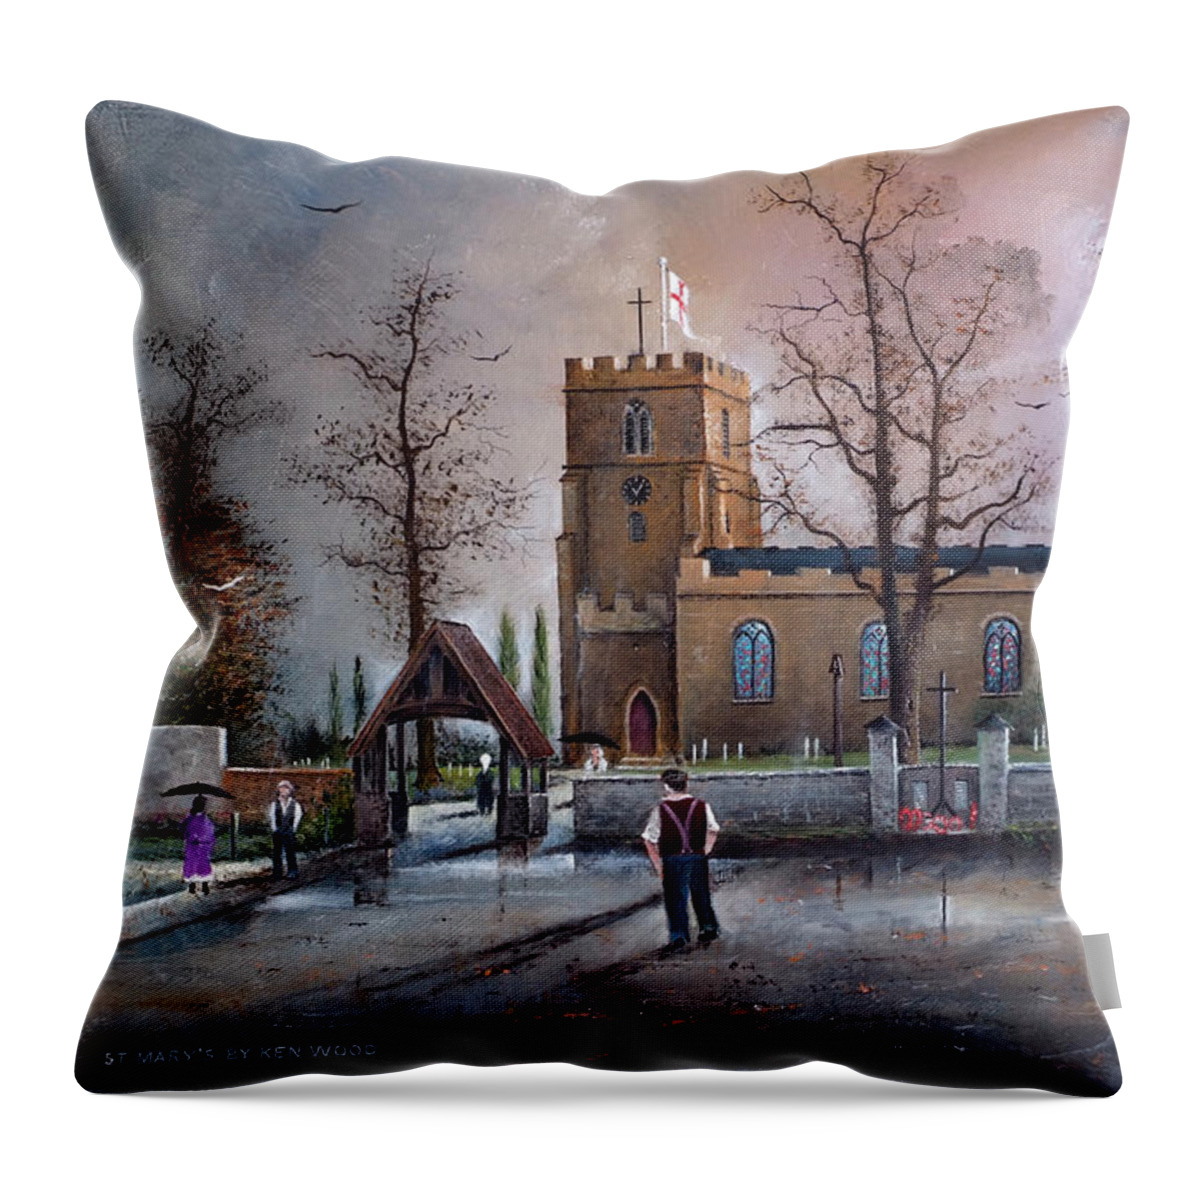 Countryside Throw Pillow featuring the painting St. Mary's Church - Kingswinford - England by Ken Wood